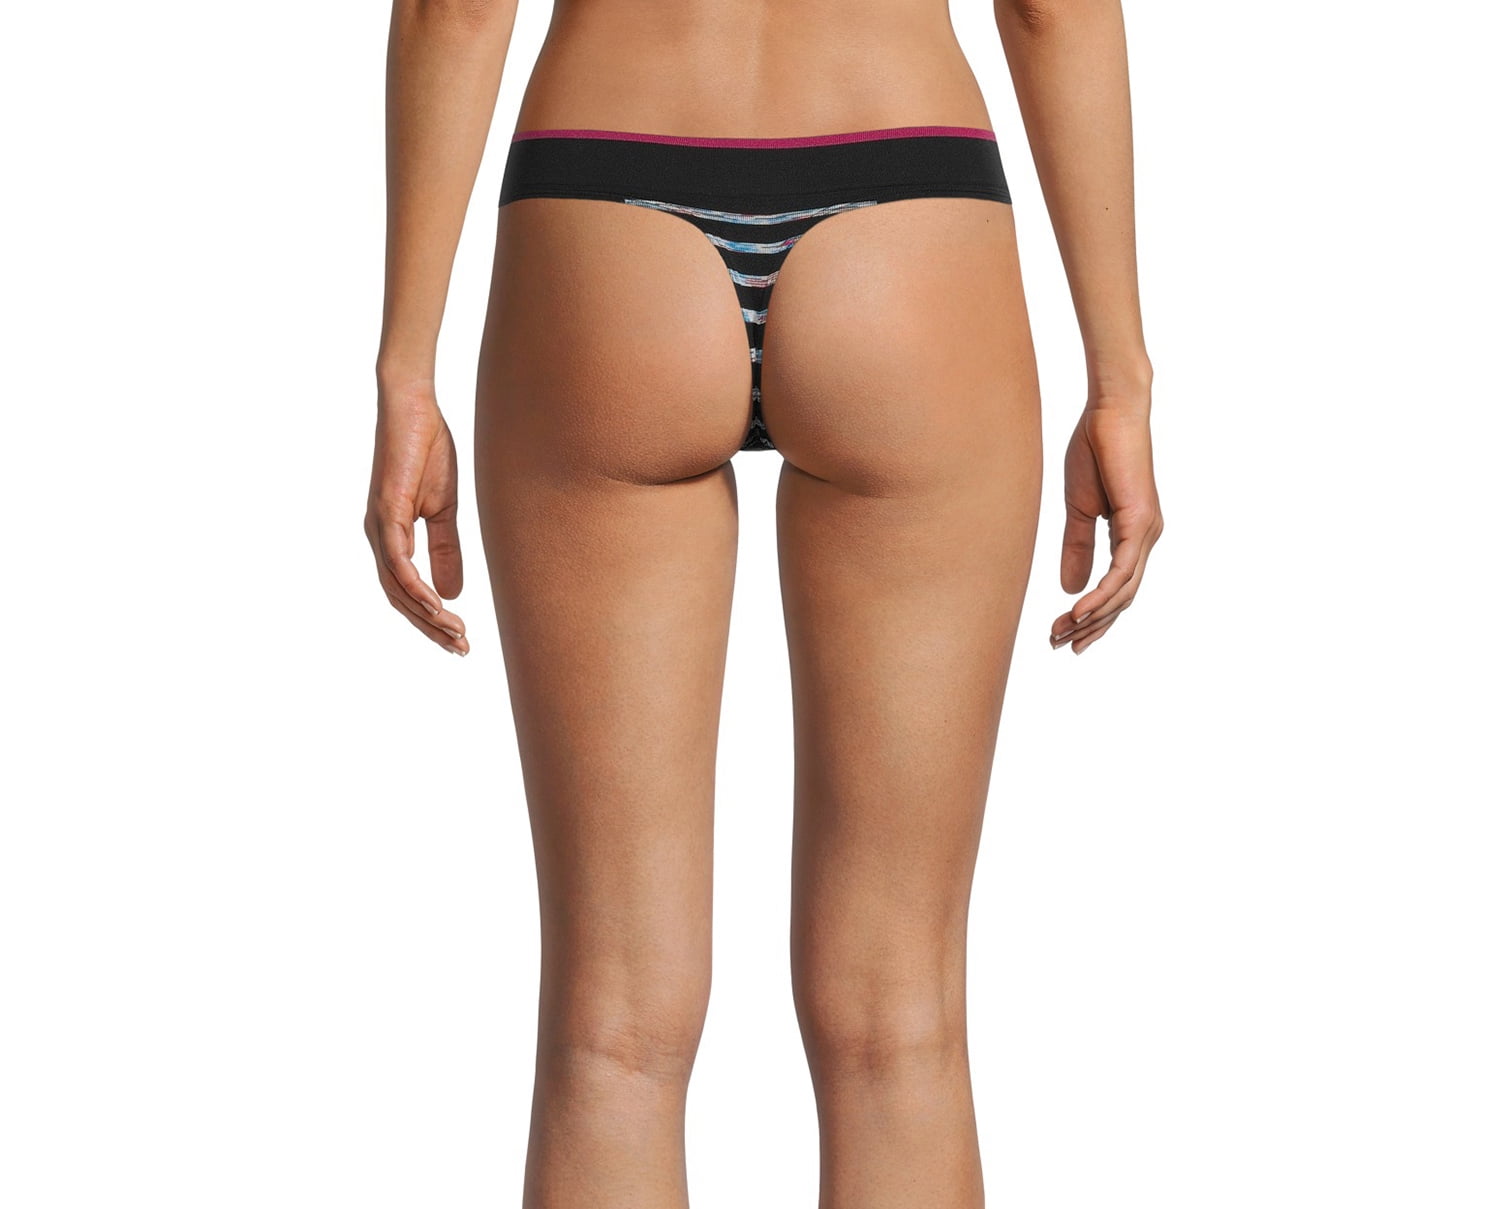 Reebok 3 pack Winifred Seamless Thong in red black and white